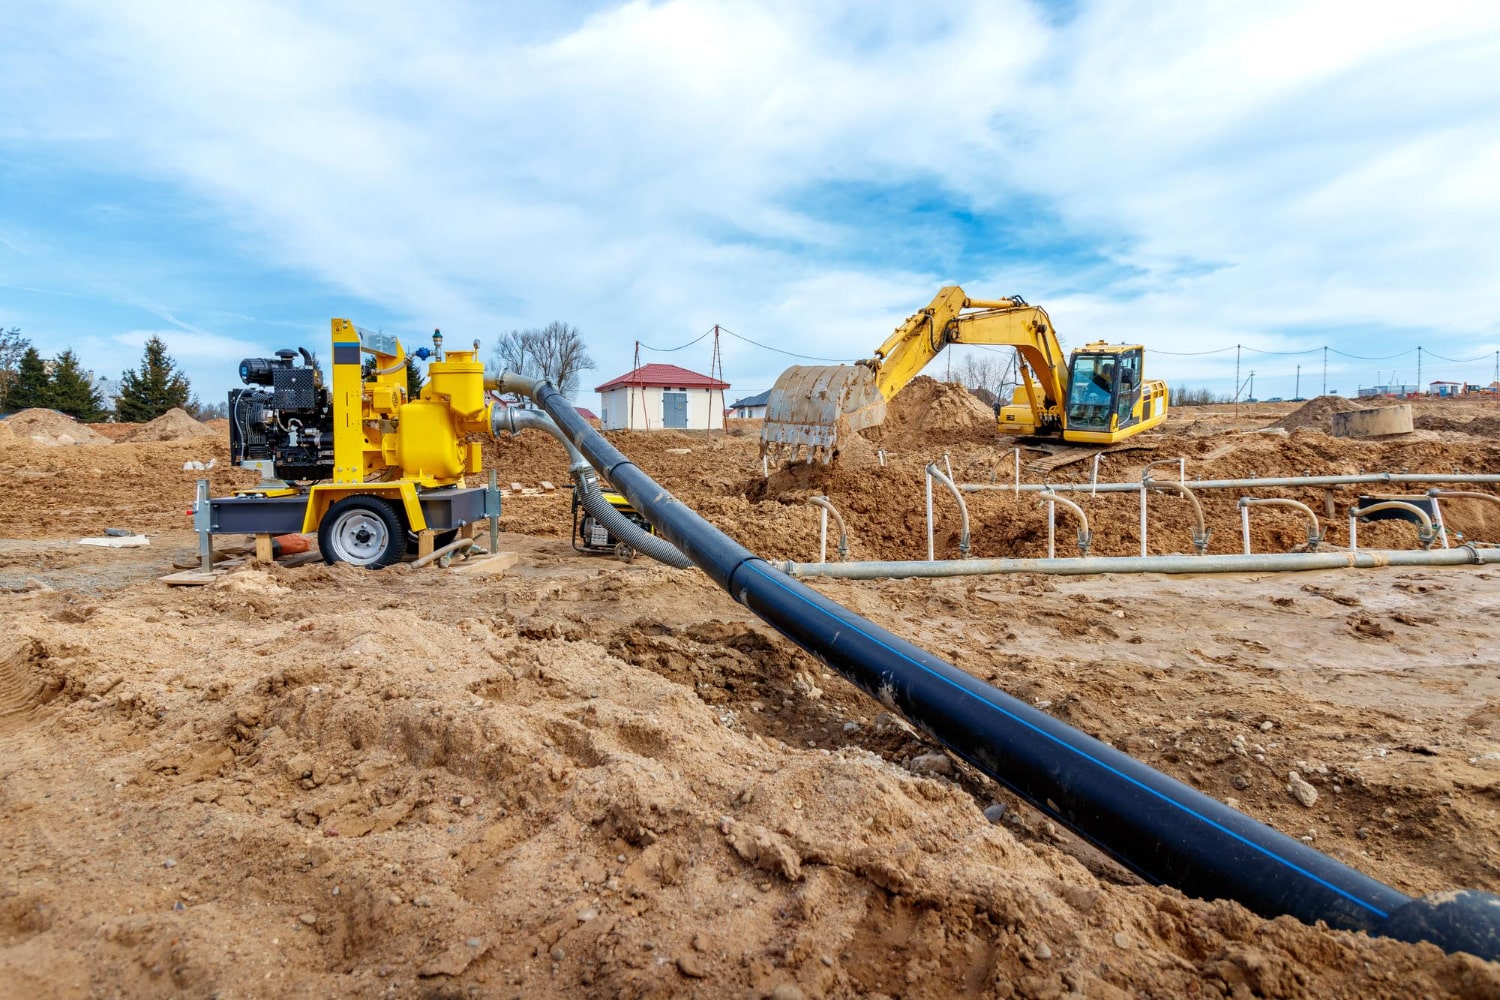 excavator-dig-trenches-construction-site-trench-laying-external-sewer-pipes-sewage-drainage-system-multistory-building-digging-pit-foundation-min